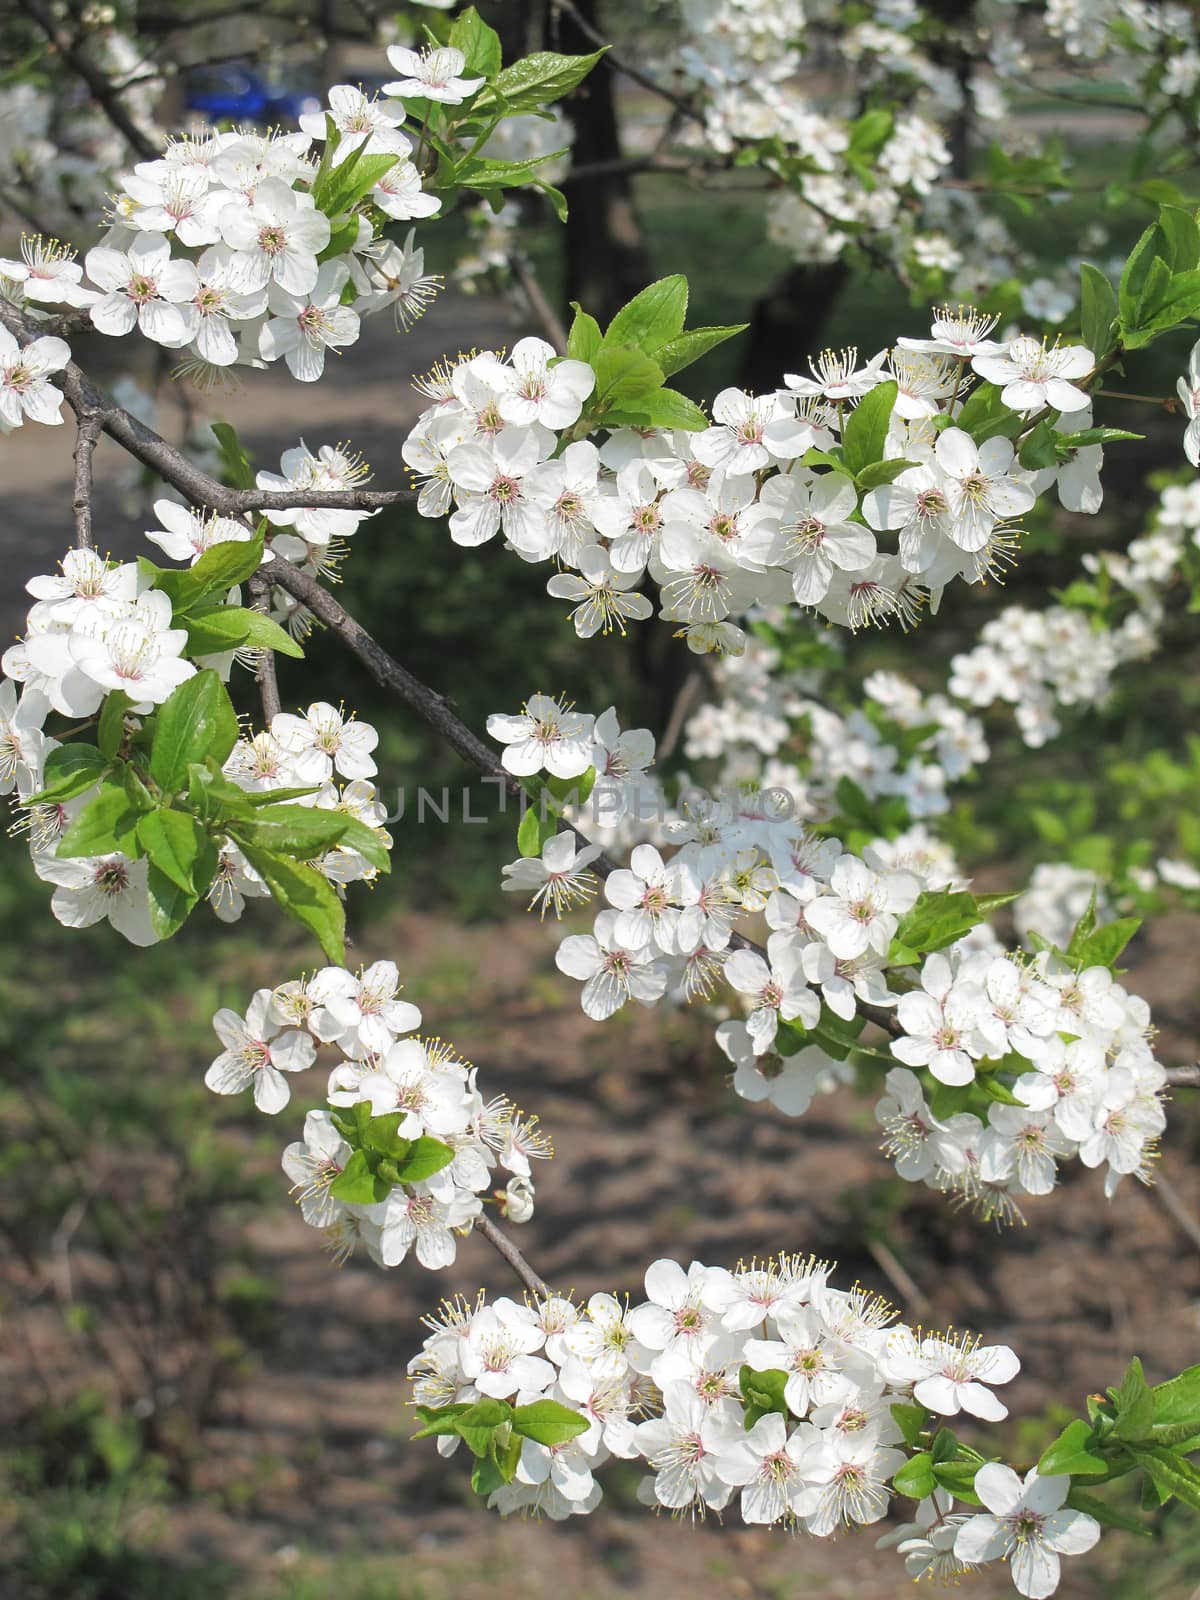 Flowering spring cherry with beautiful white flowers and green leaves